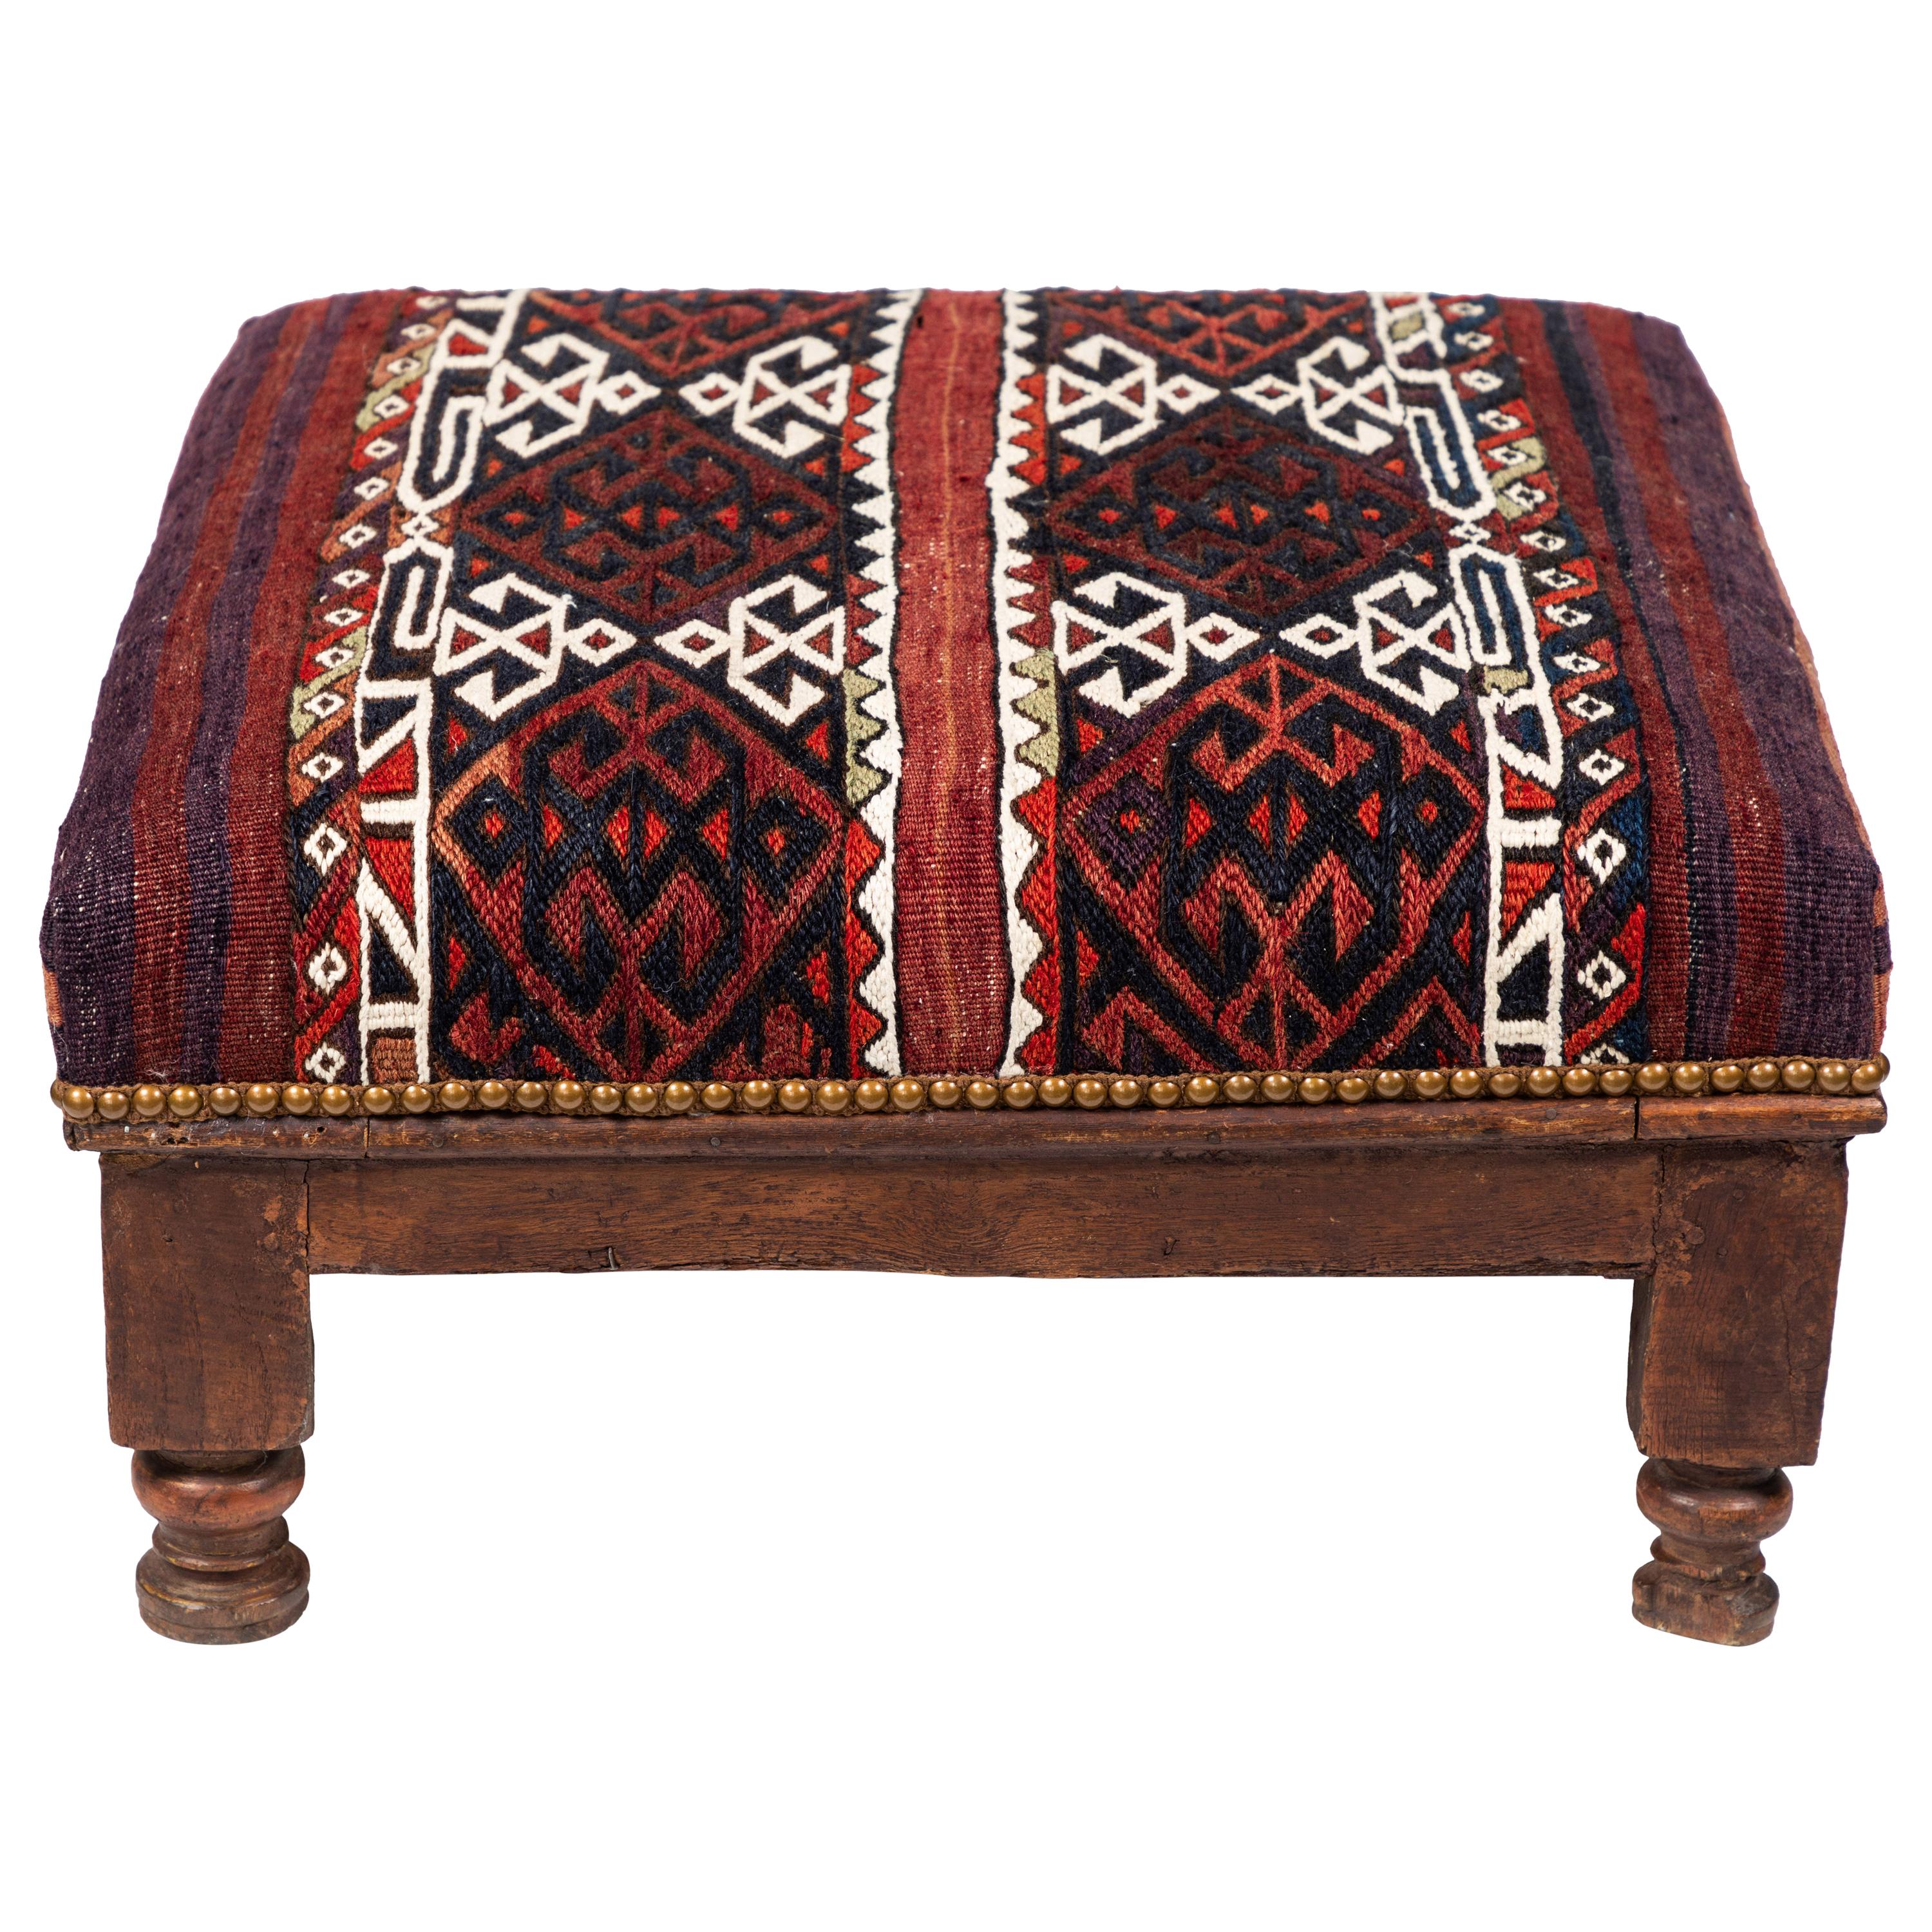 Vintage Wood Foot Stool Newly Upholstered in a Vintage Wool Rug from Turkey